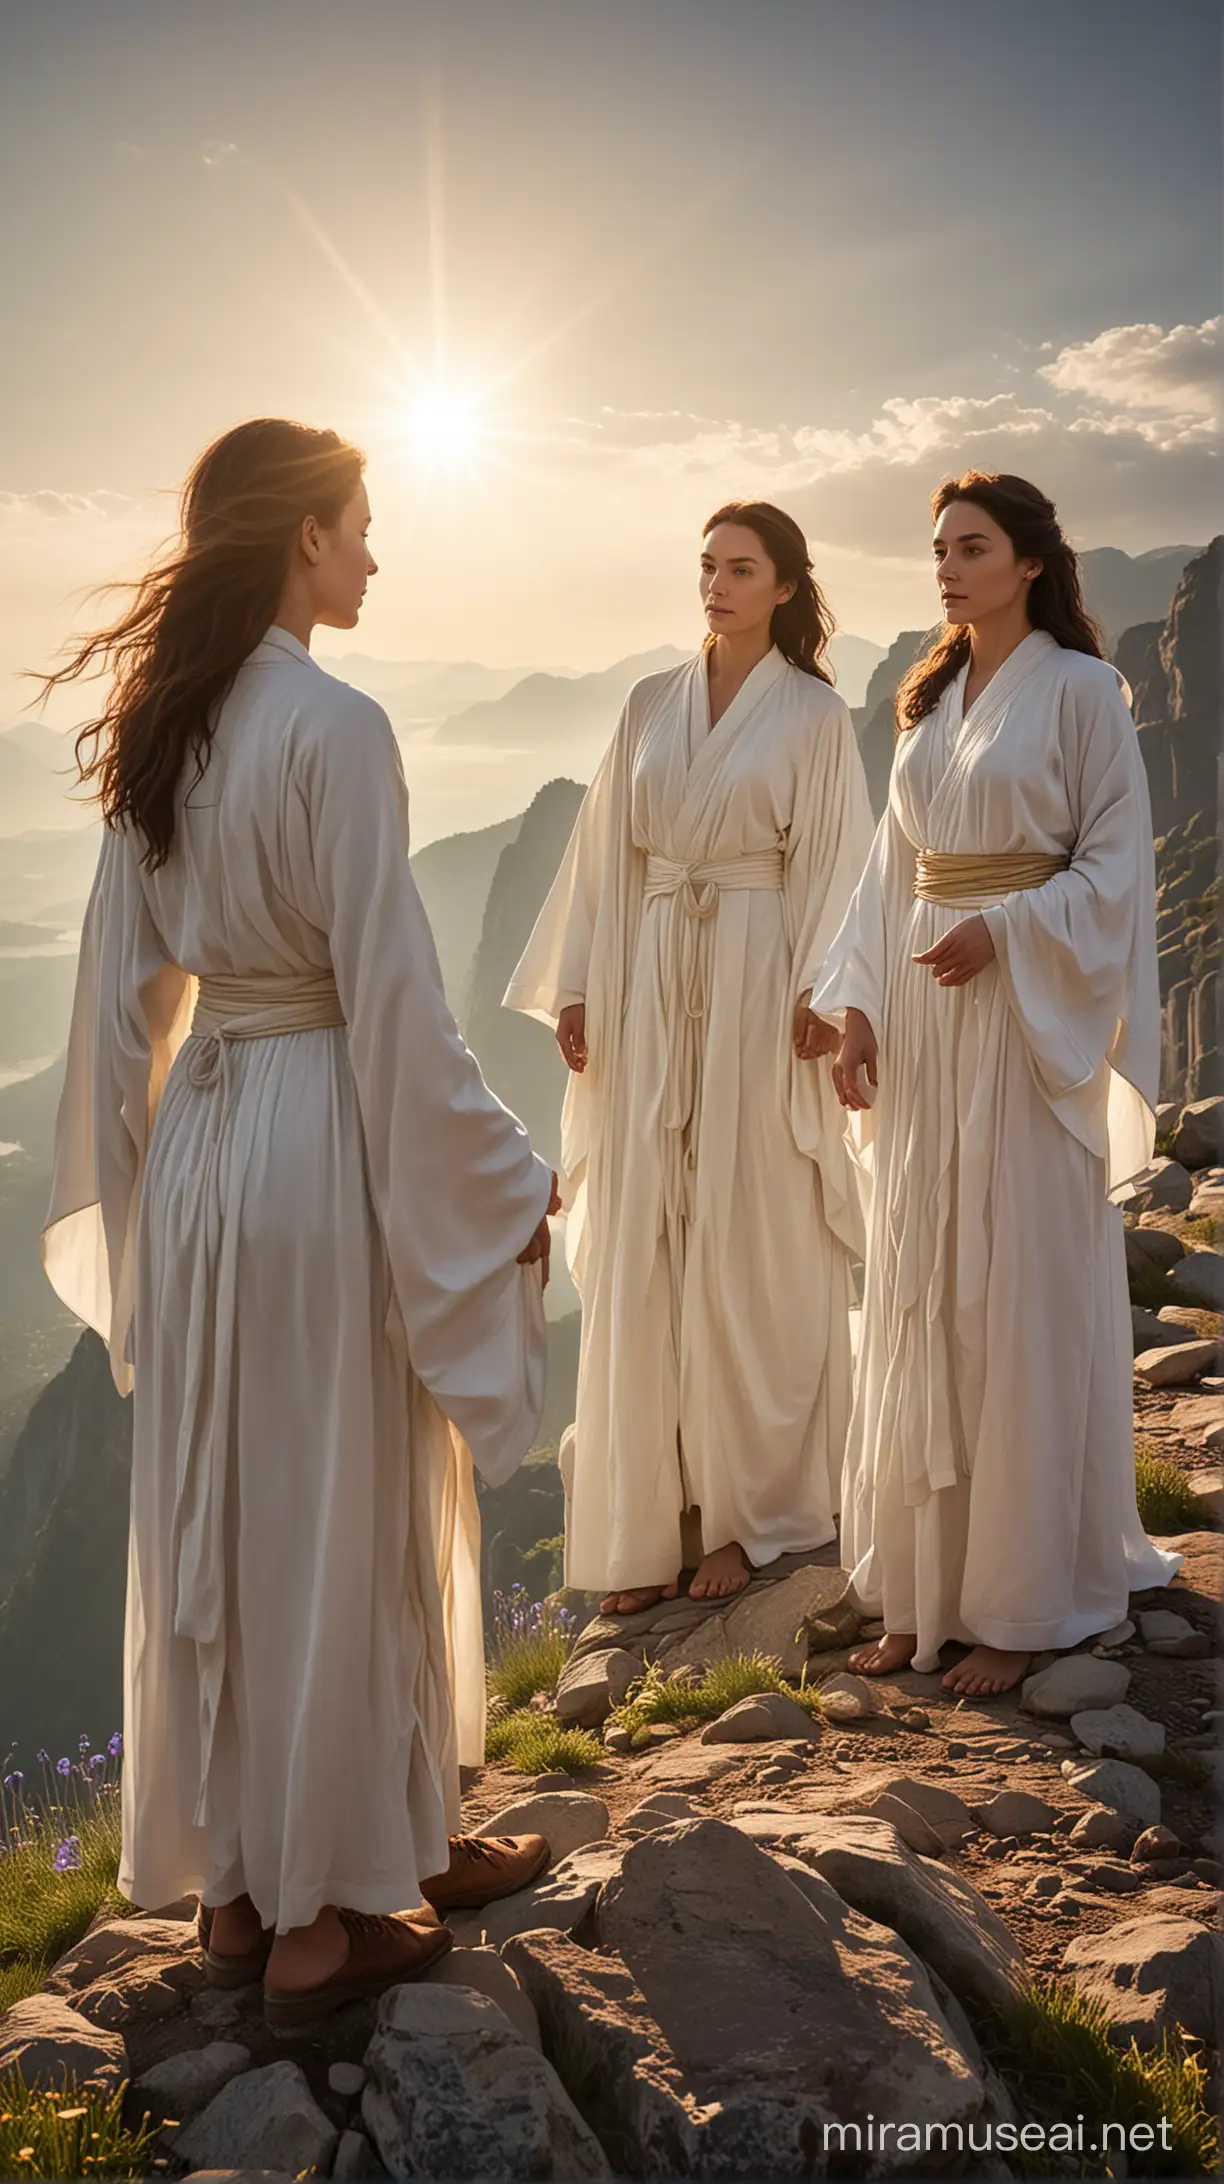 Image description:

Three people are standing on the top of a mountain, dressed in glowing white robes. Sunlight illuminates the scene, creating a divine and mystical atmosphere.

Technical settings:

Depth of field: Focus on the characters and blur the background to highlight them.
Focus: Focus on the characters' faces to highlight their expression and the shine of their robes.
ISO: Adjust to capture natural light without adding noise.
Iris Aperture: Select an aperture that allows the appropriate amount of light.
Exposure Time (Mt. F.): Adjust to capture the light surrounding motionless characters.
Atmosphere and tone:

The scene is serene and transcendental, with warm tones that highlight the feeling of peace and spiritual elevation. Sunlight enhances the natural colors of the mountain, creating a contrast between the earthly and the divine.